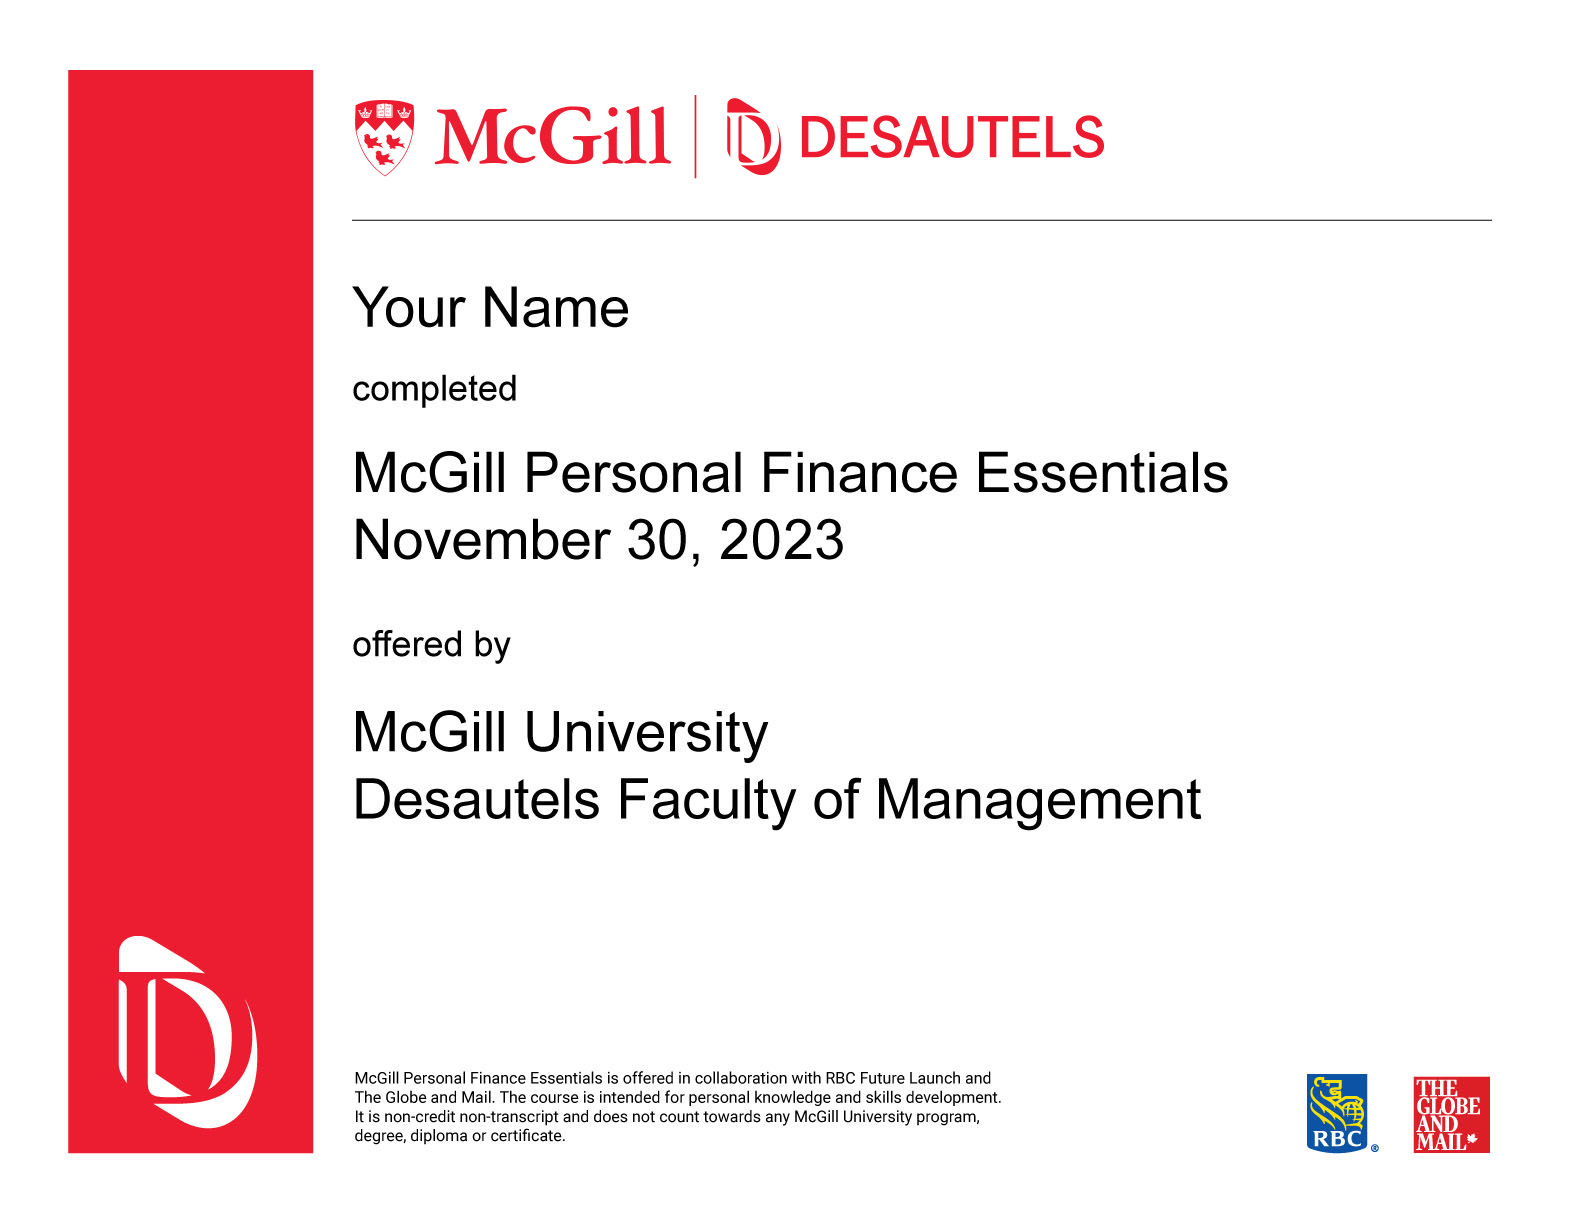 McGill Personal Finance Essentials in collaboration with RBC Future Launch and The Globe and Mail offers general information only and is not intended as legal, financial or other professional advice. A professional advisor should be consulted regarding your specific situation. While information presented is believed to be factual and current, it should not be regarded as a complete analysis of the subjects discussed. All expressions of opinion reflect those of the individual professor and are subject to change. 2 The McGill Personal Finance Essentials course is intended for personal knowledge and skills development. The course is non-credit non-transcript and does not count towards any McGill University program, degree, diploma, or certificate. McGill University and visual symbols associated with McGill University are prohibited marks of McGill University. Used under license. RBC, Royal Bank and RBC Future Launch are registered trademarks of Royal Bank of Canada. Used under license. The Globe and Mail is a registered trademark of The Globe and Mail Inc. Used under license.